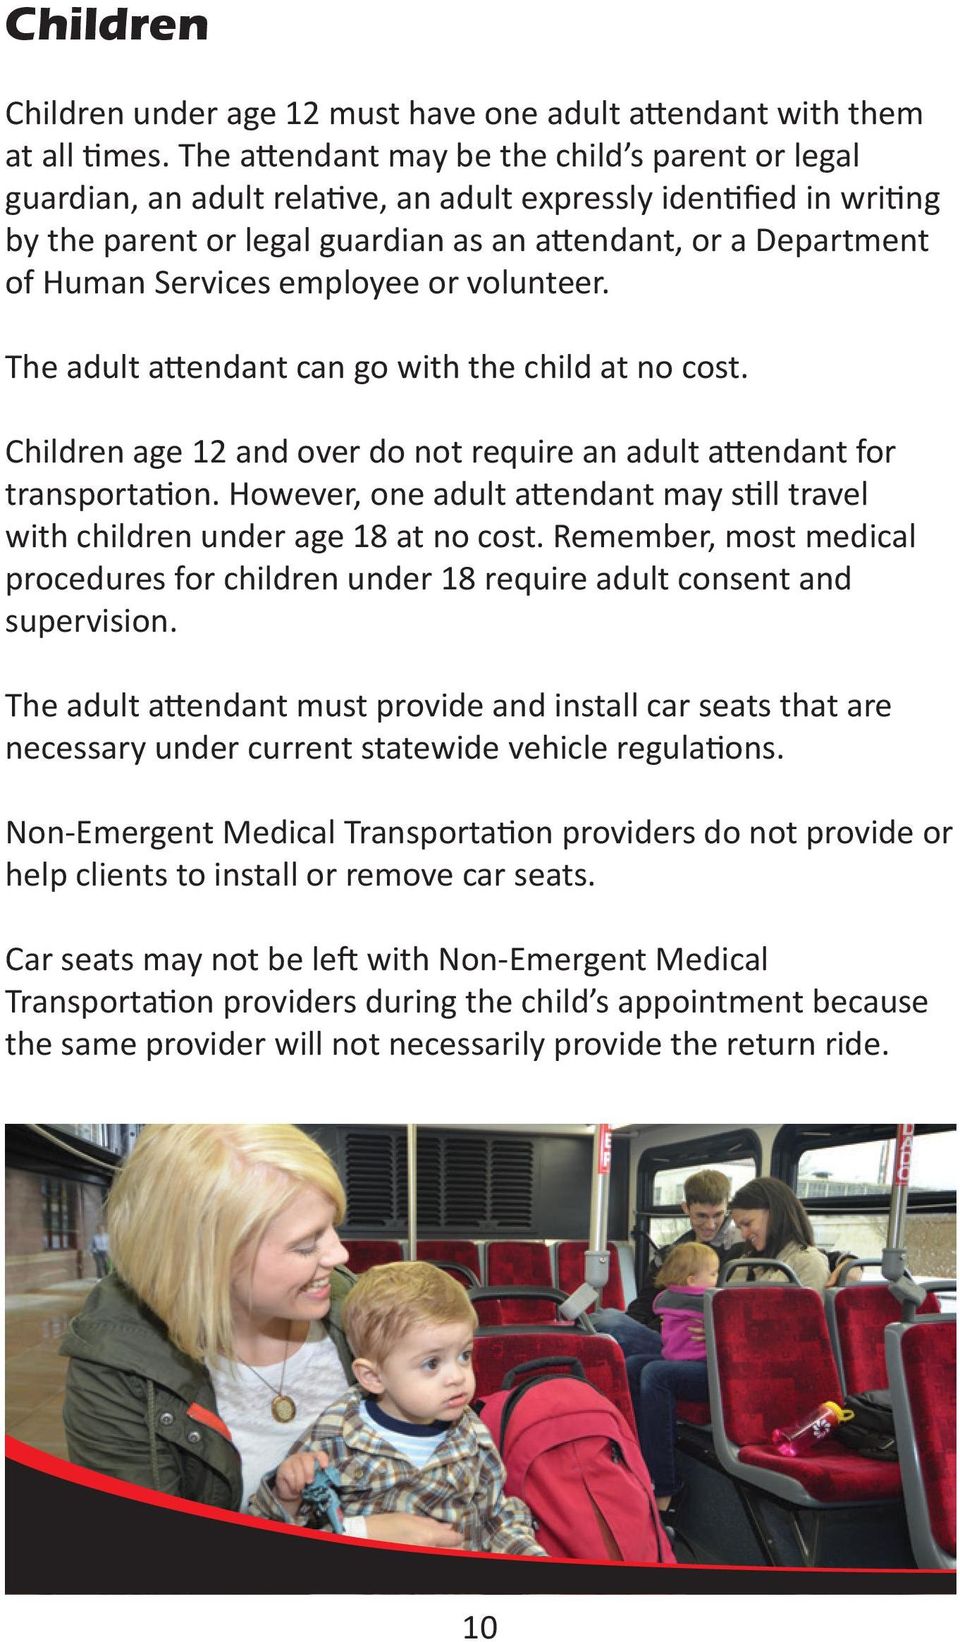 Services employee or volunteer. The adult attendant can go with the child at no cost. Children age 12 and over do not require an adult attendant for transportation.